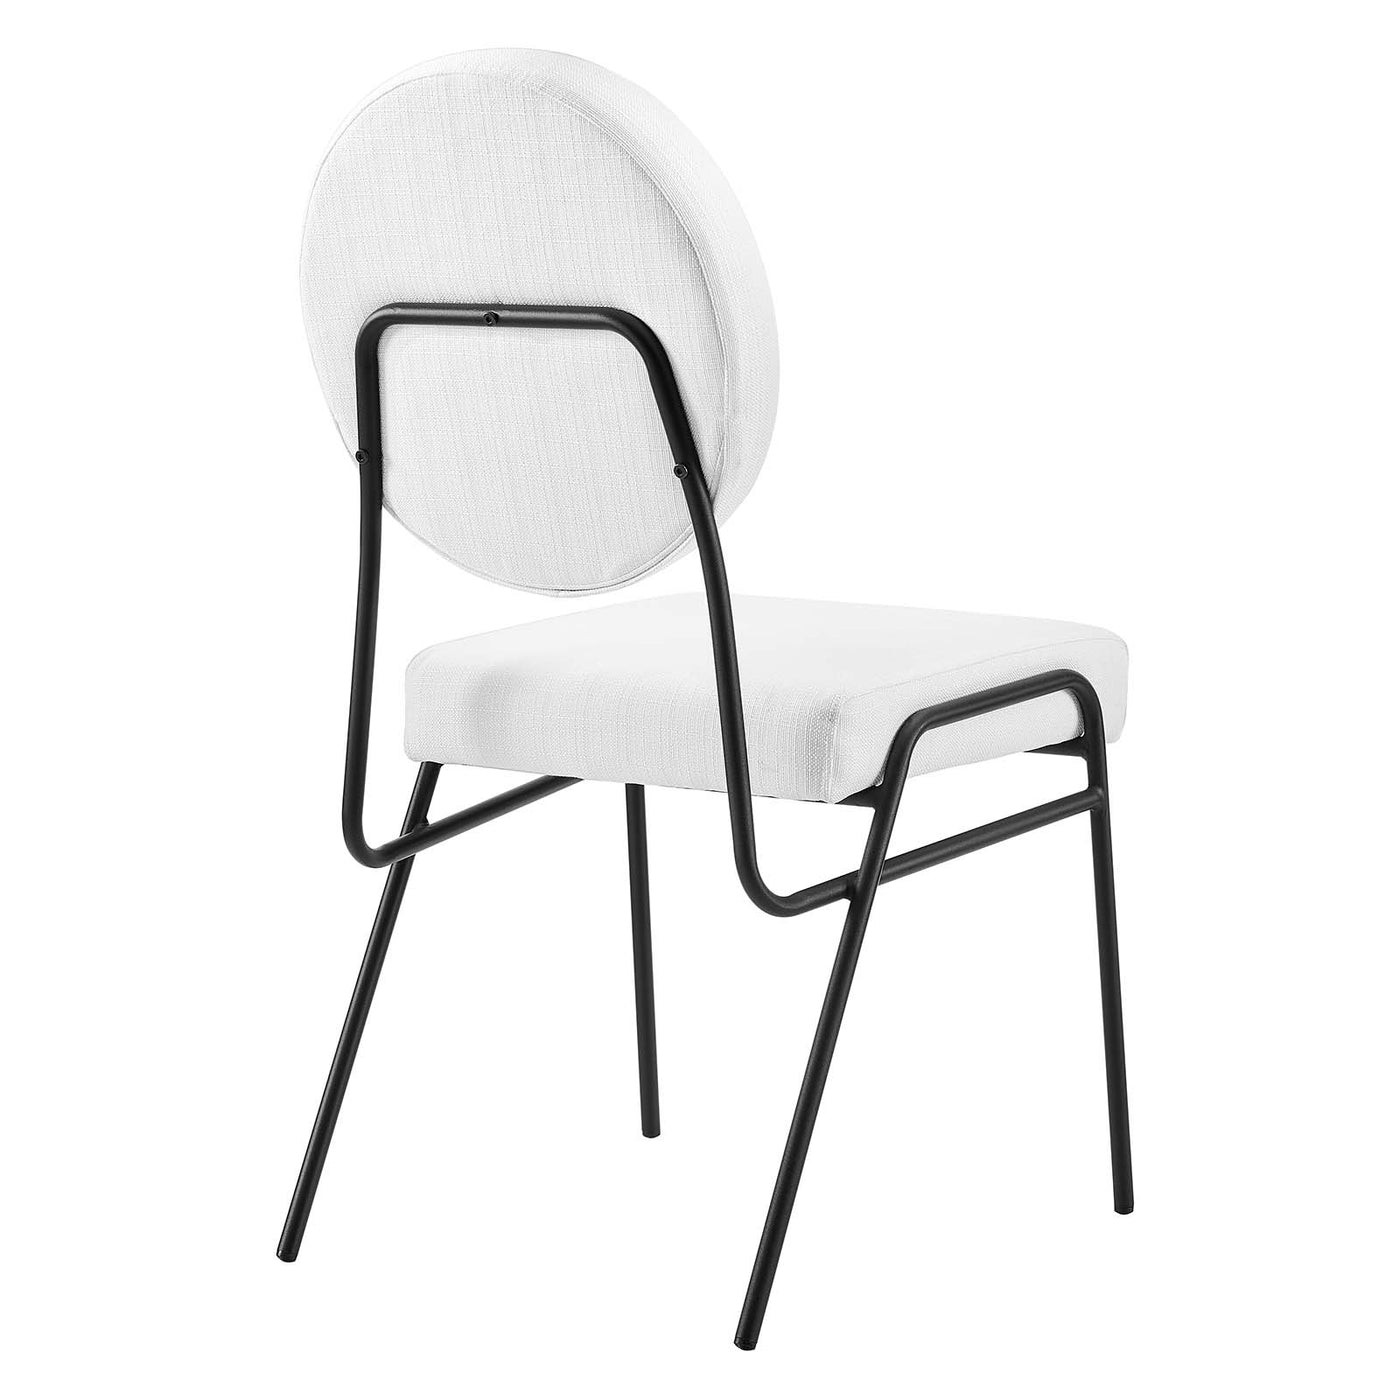 Craft Upholstered Fabric Dining Side Chairs